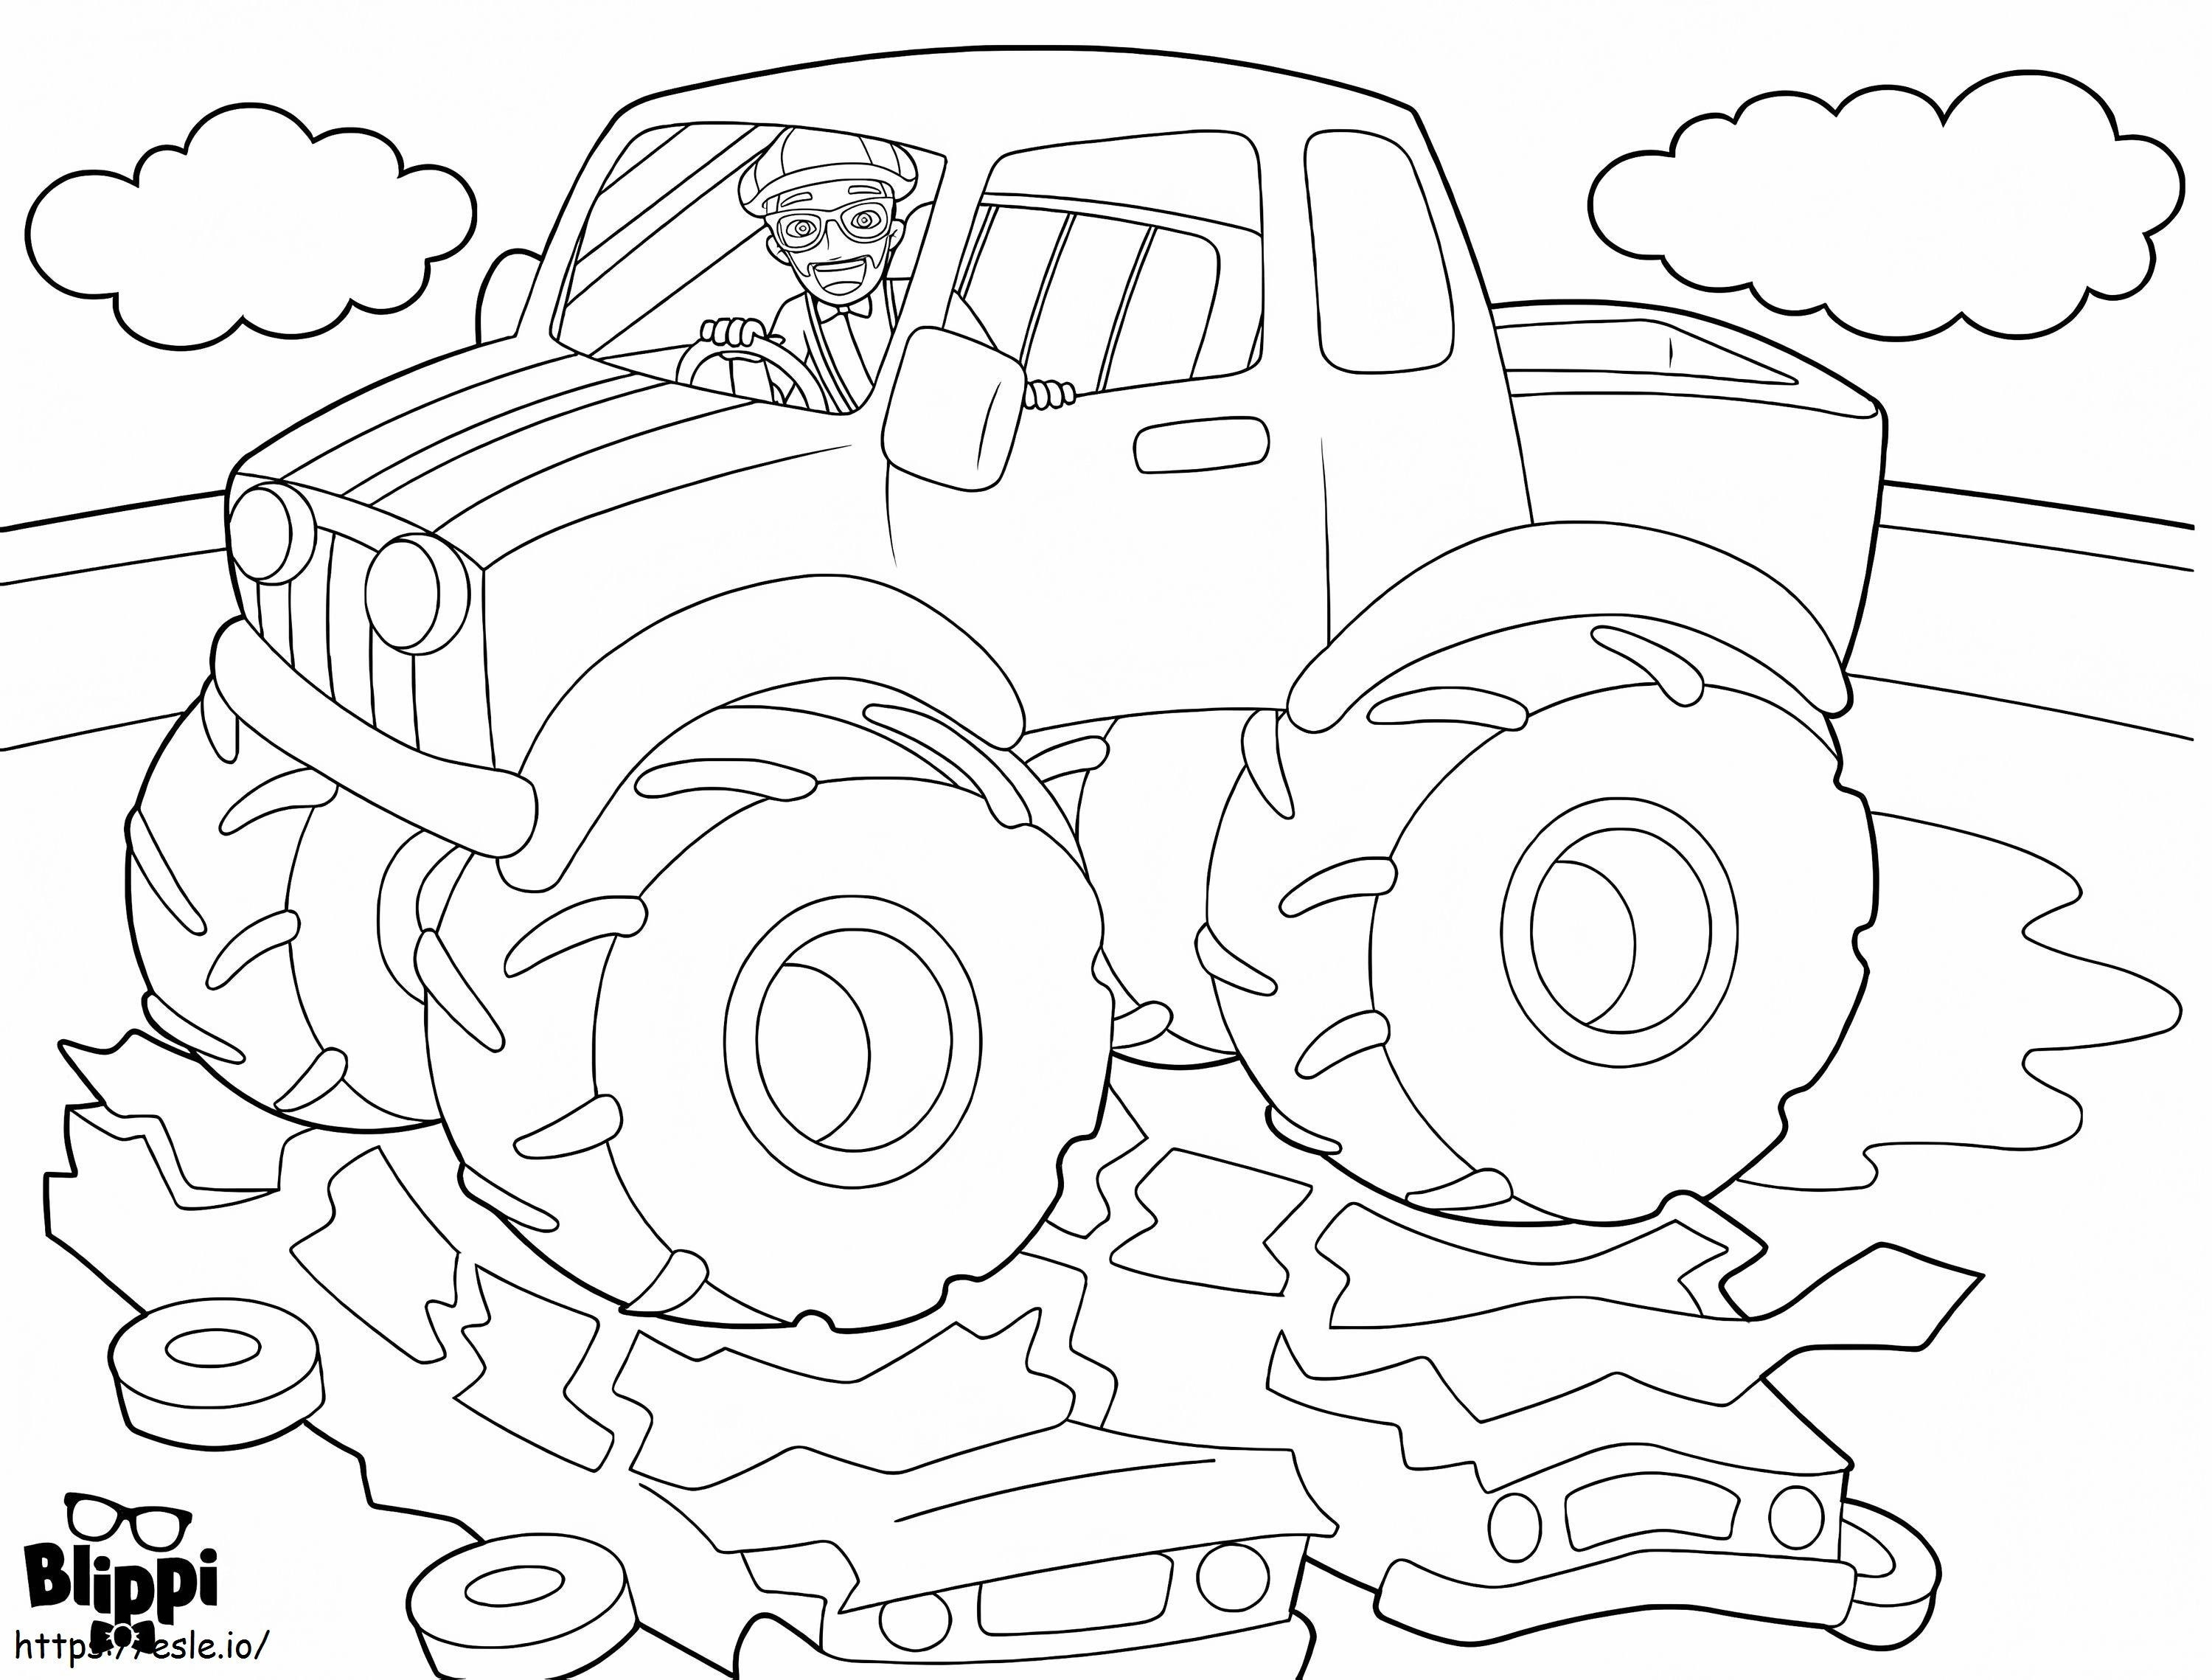 Blippi In Monster Truck coloring page